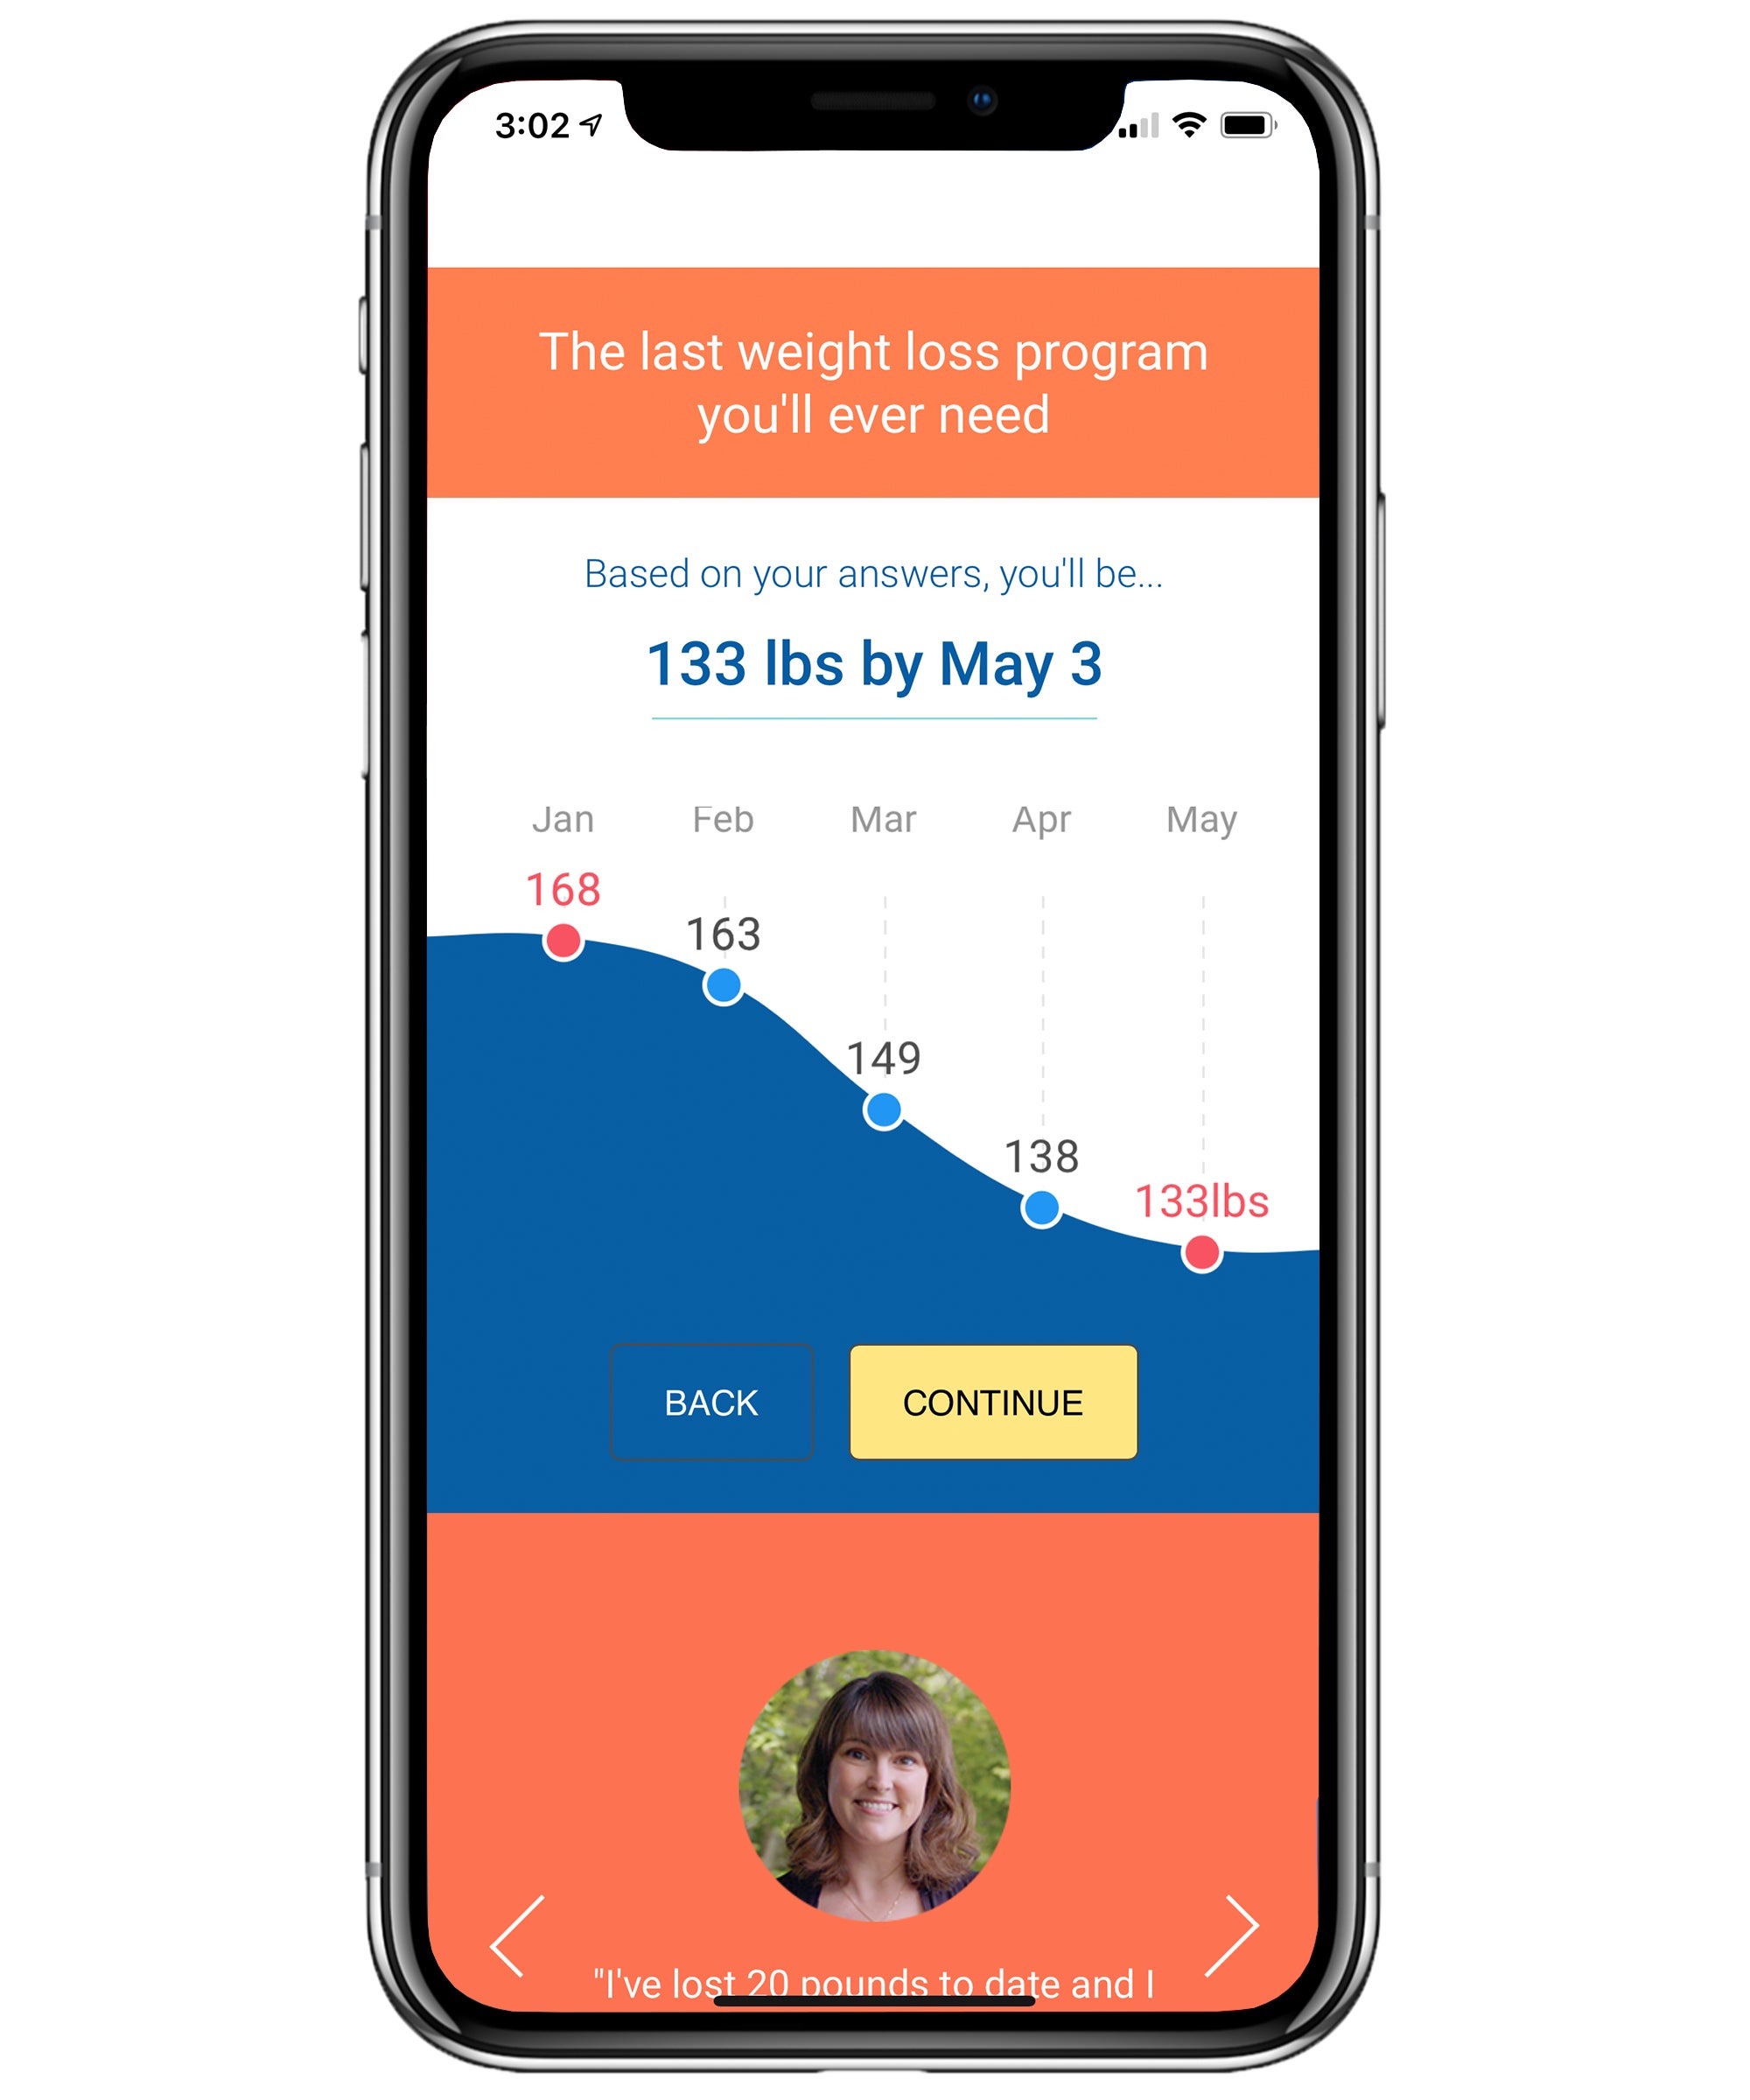 Weight-loss app Noom is a diet, which might be why its pandemic